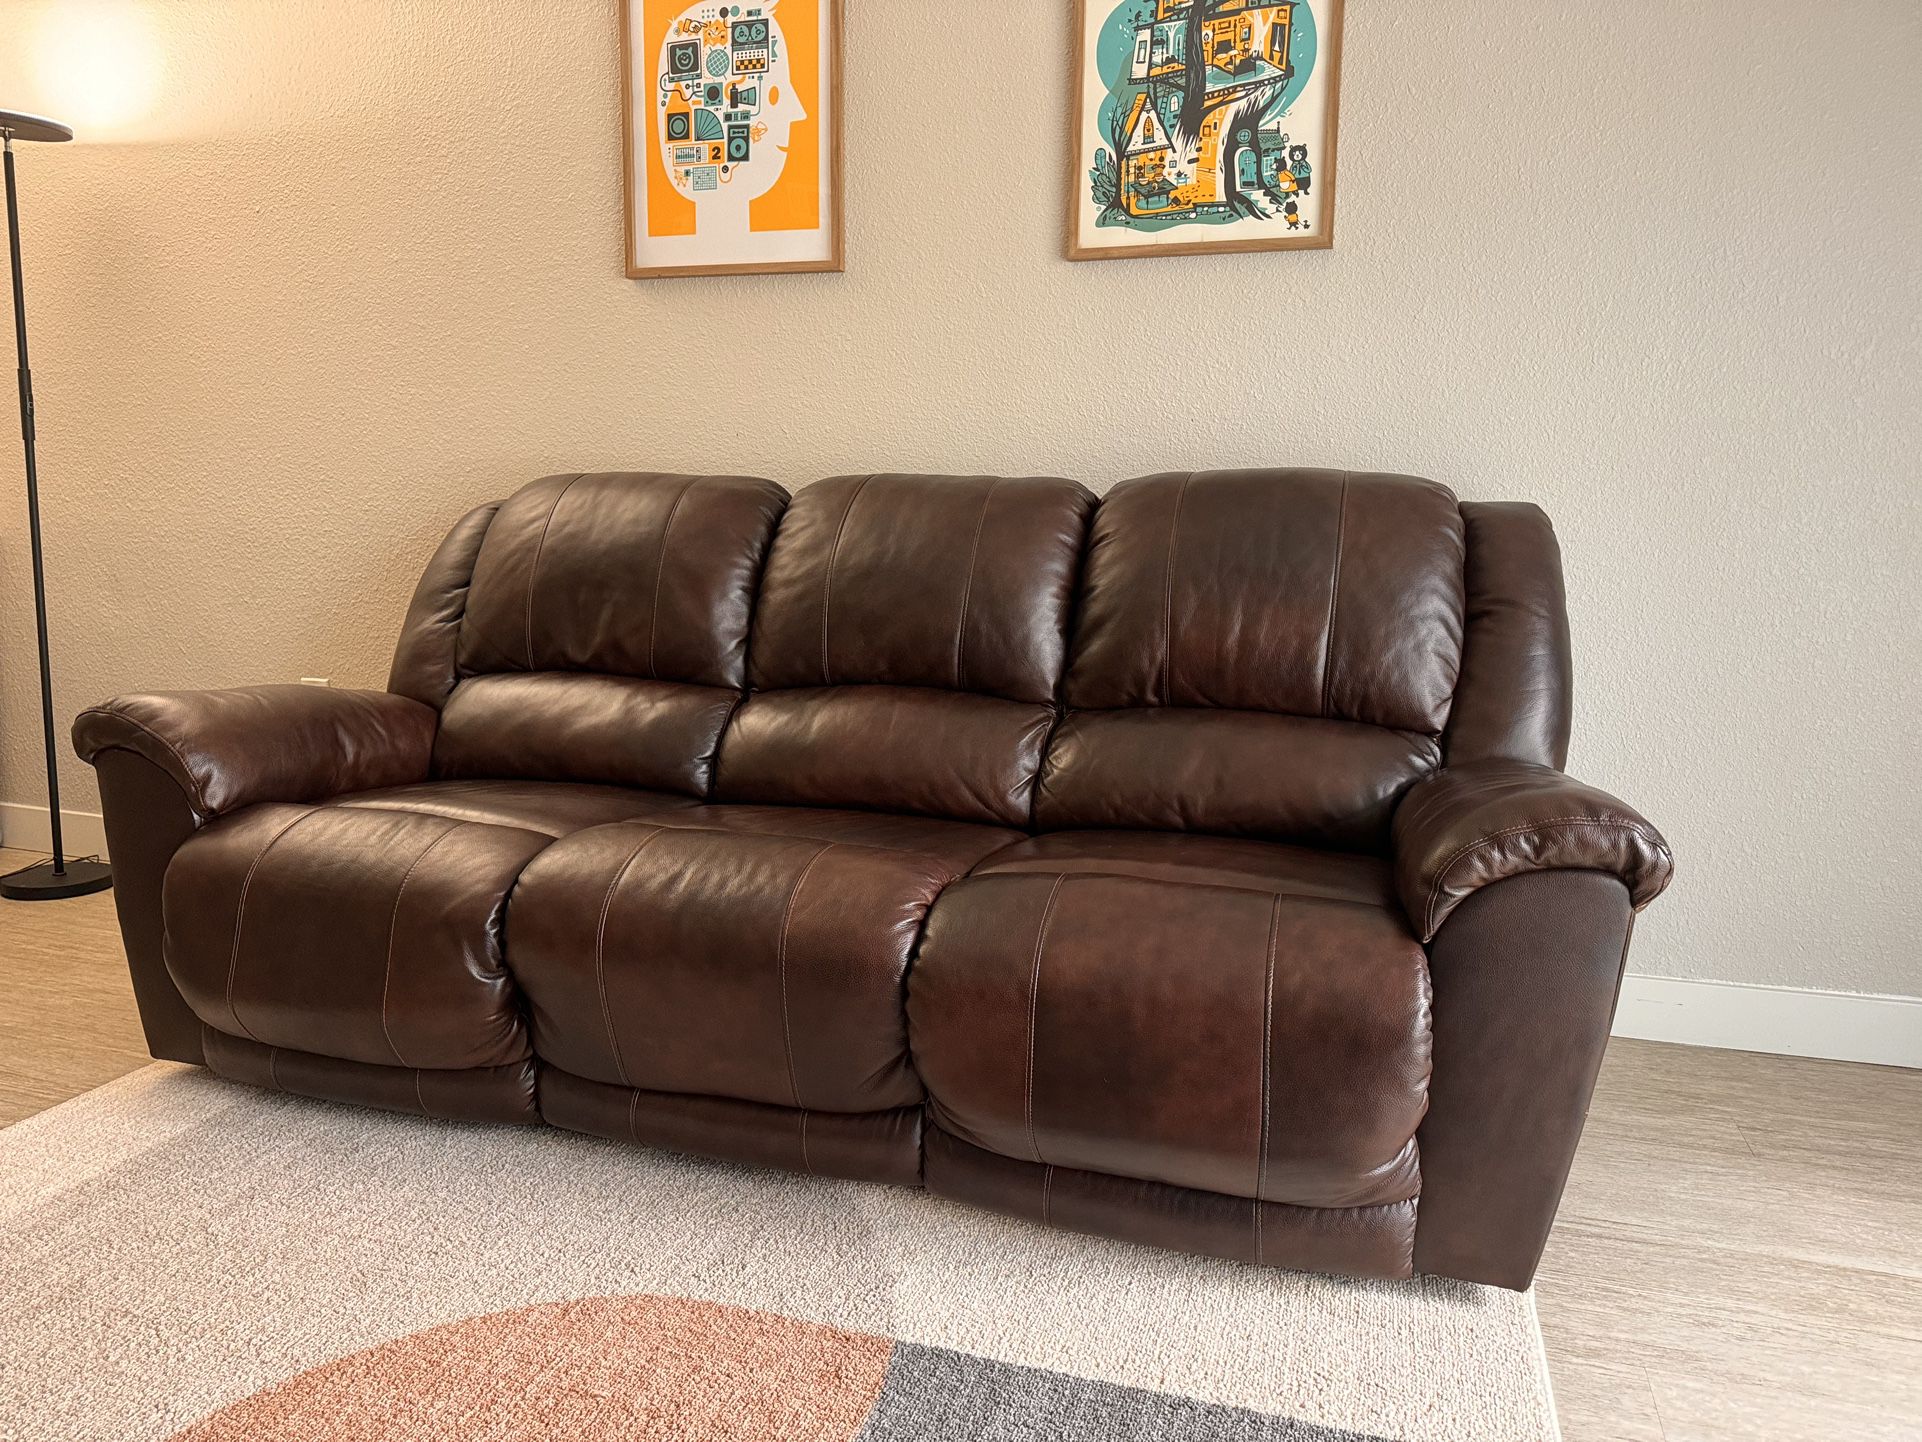 Genuine Leather Recliner 3 Seat (Moving Out Sale)